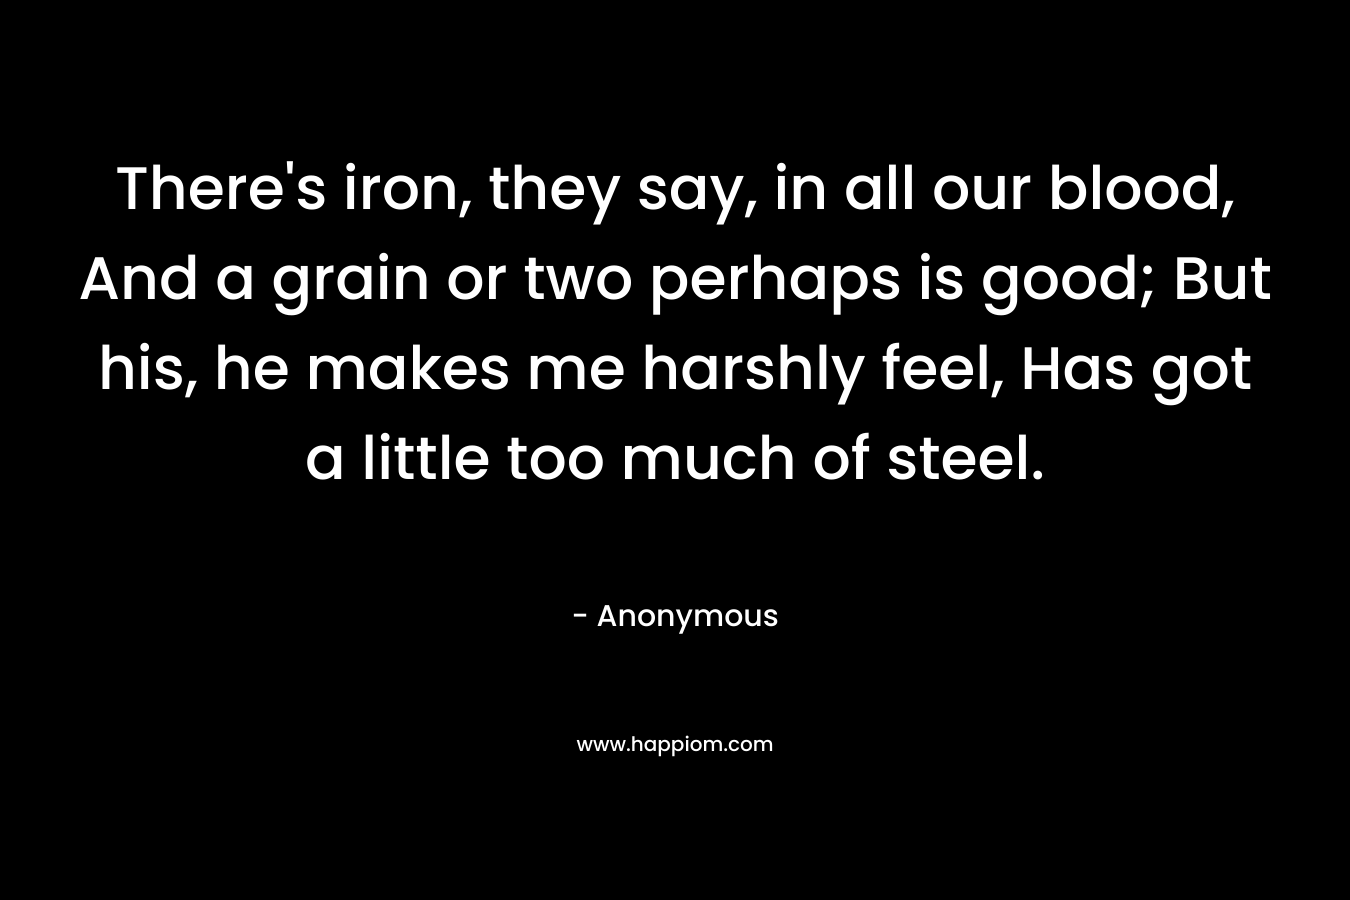 There's iron, they say, in all our blood, And a grain or two perhaps is good; But his, he makes me harshly feel, Has got a little too much of steel.